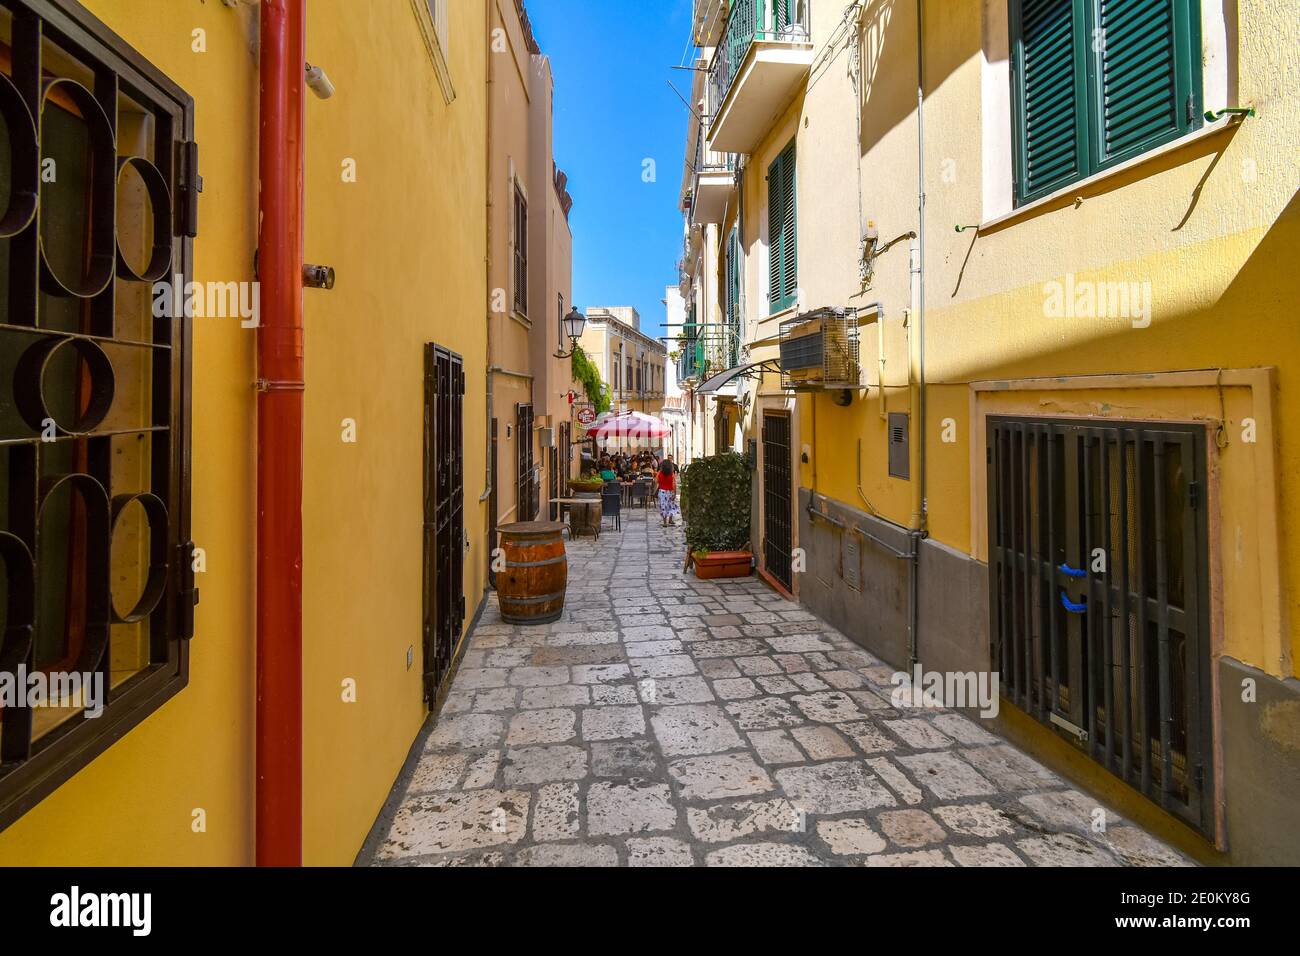 A woman walks down a colorful narrow alley towards a cafe in the Italian city of Brindisi Italy, in the Puglia region. Stock Photo